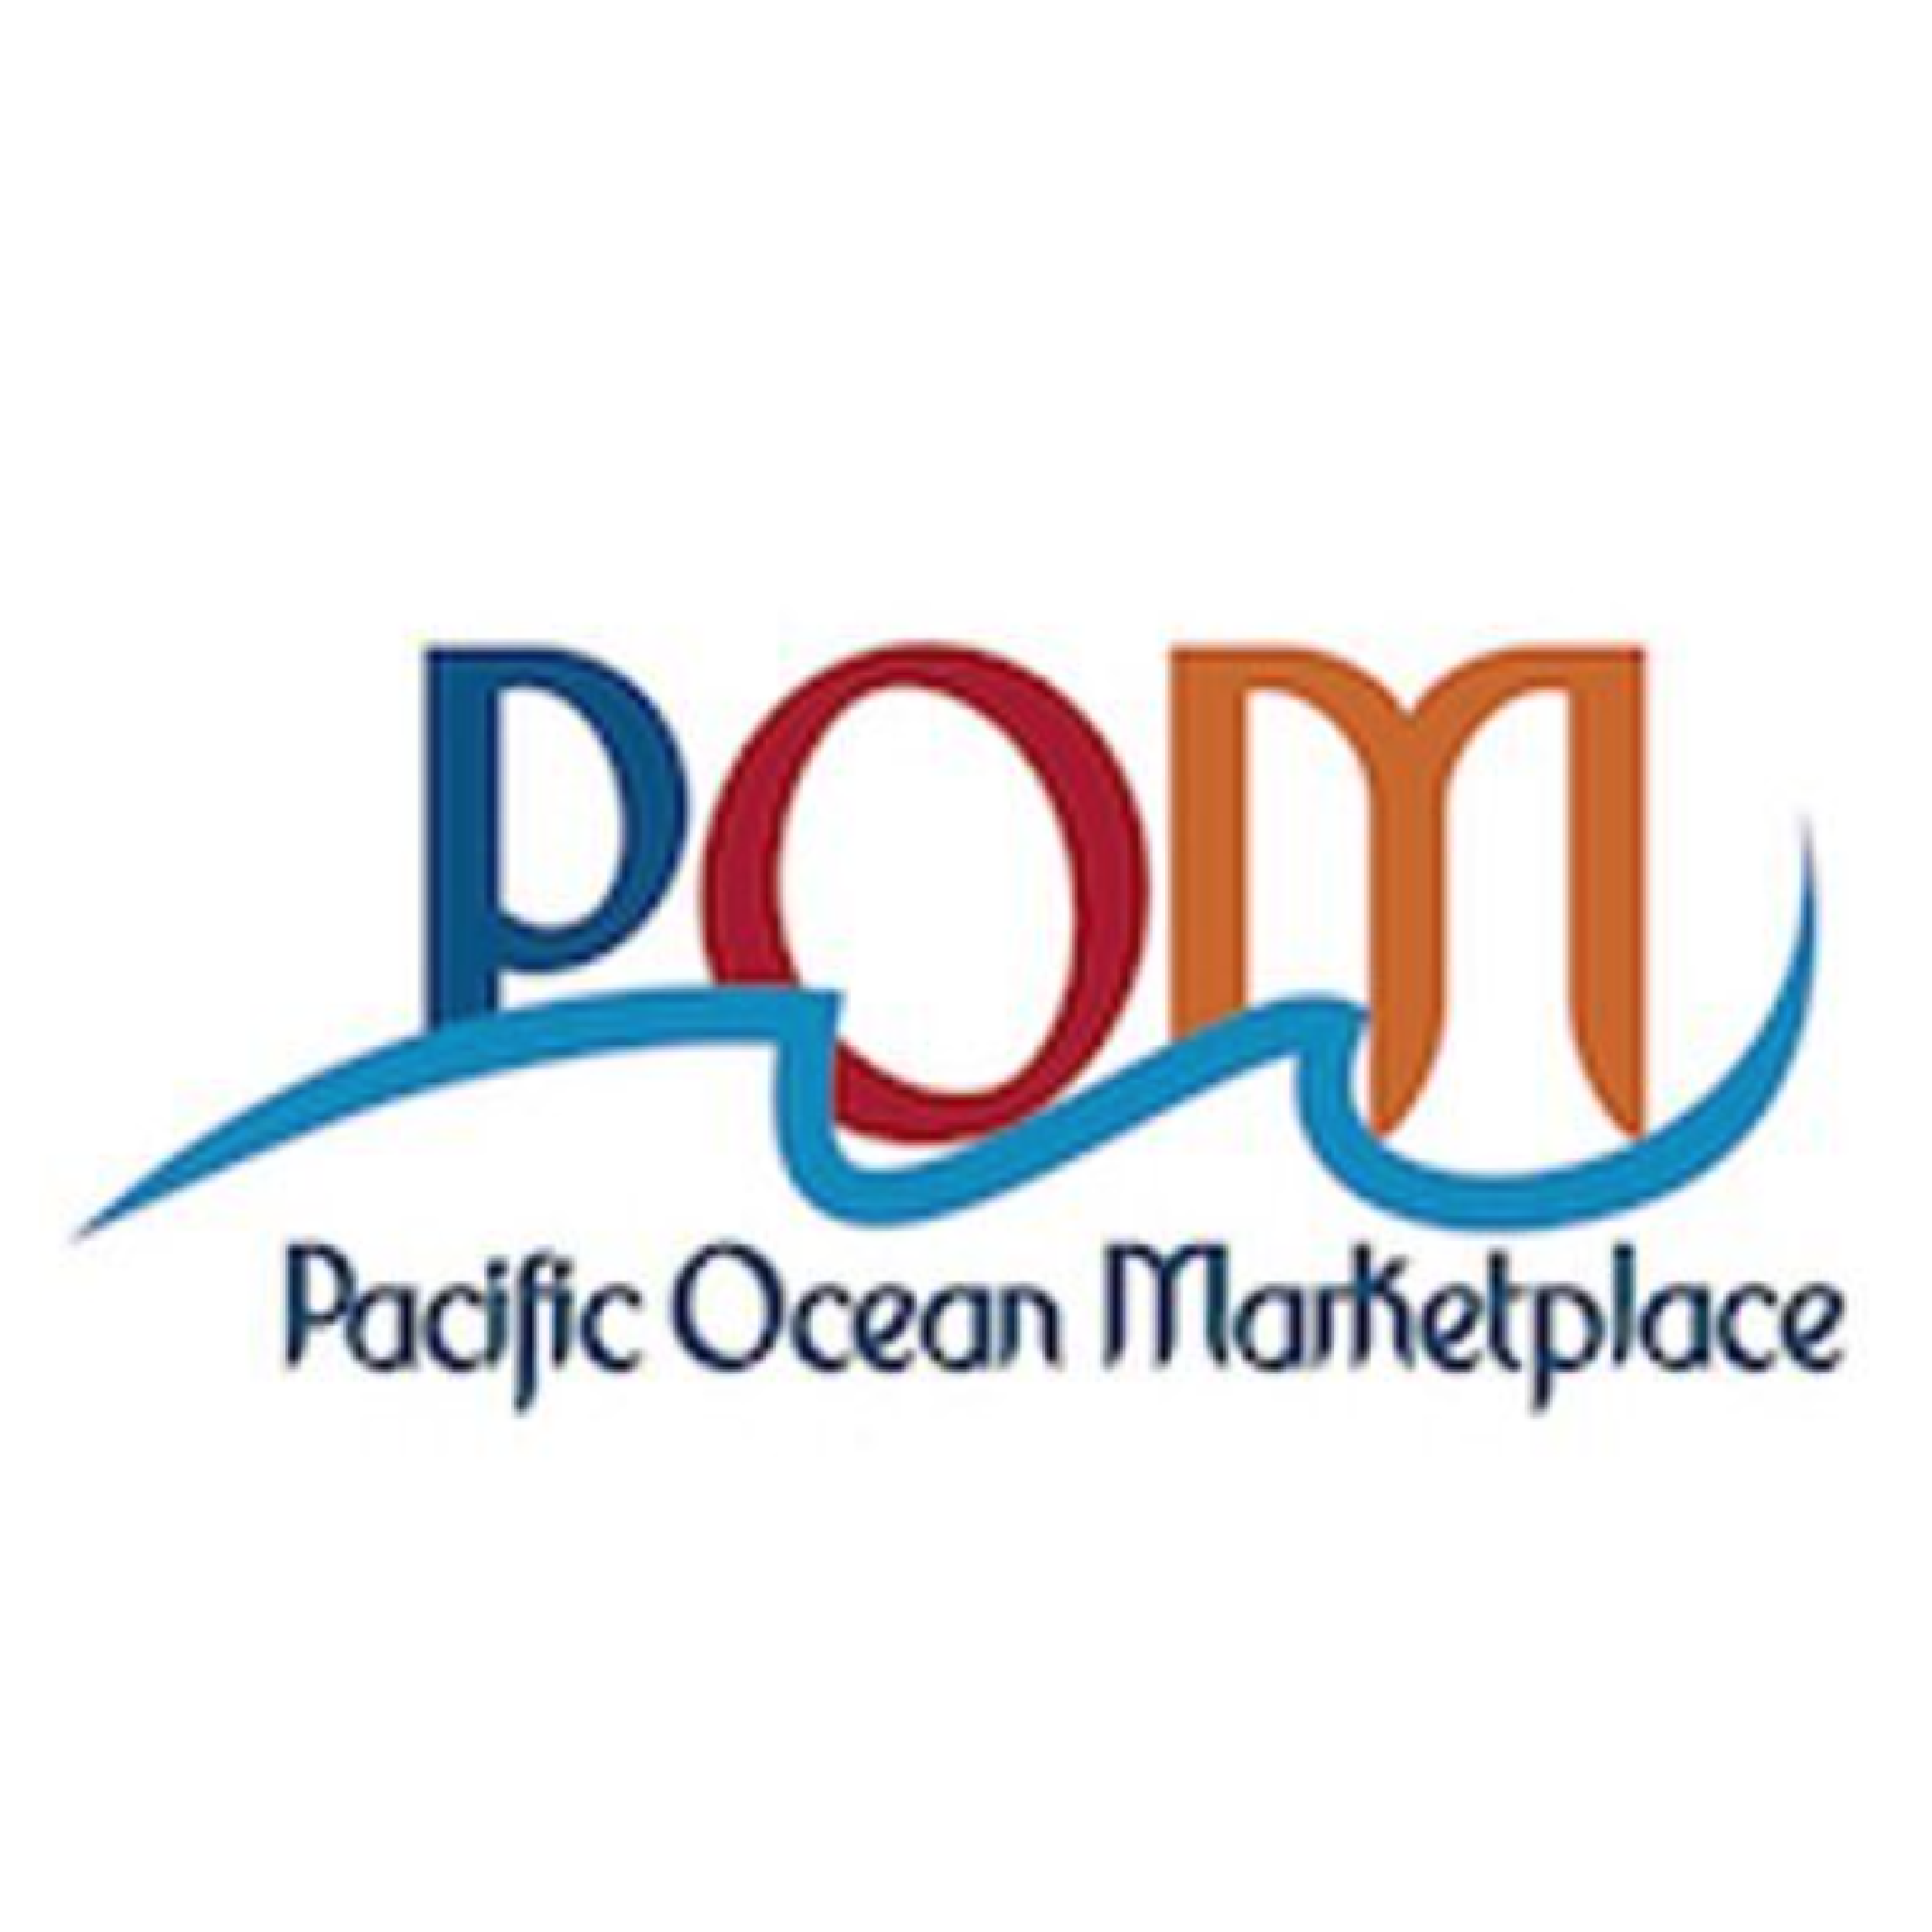 Pacific Ocean Marketplace.png